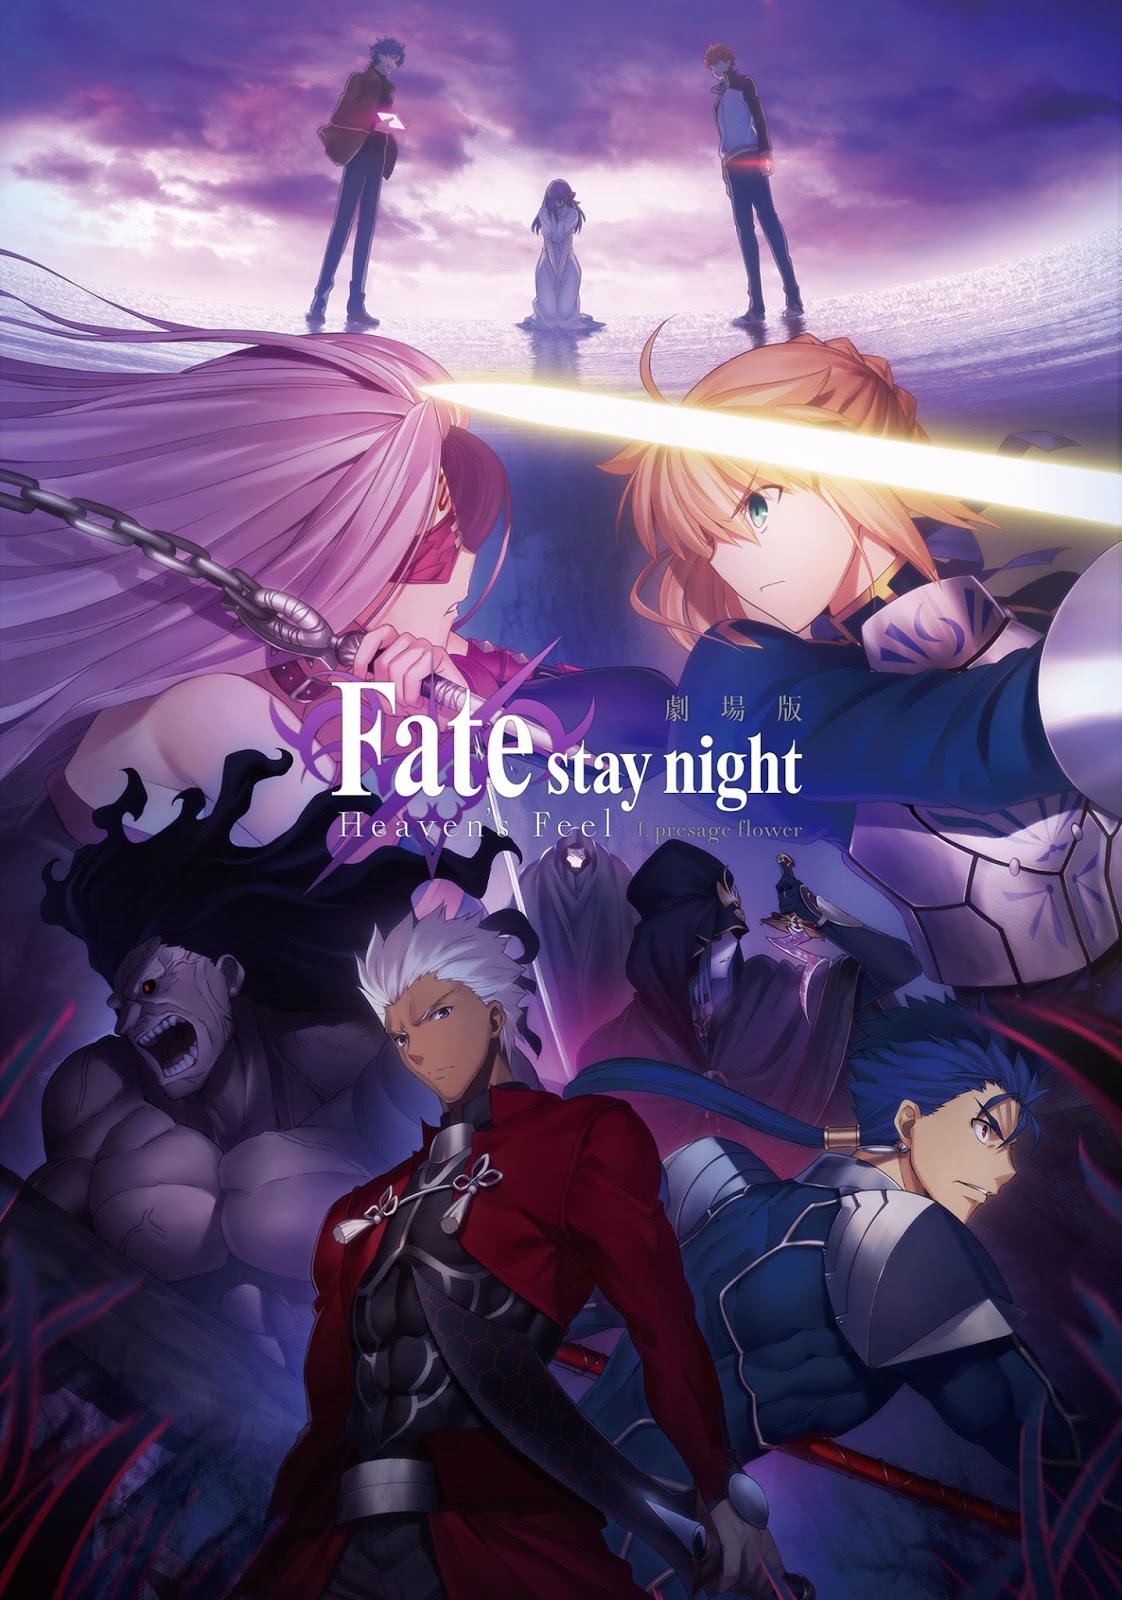 Pennsylvasia English Dub Of Fate Stay Night Heaven S Feel 1 Presage Flower 劇場版 Fate Stay Night Heaven S Feel 第一章 Presage Flower In Pittsburgh June 5 And 7